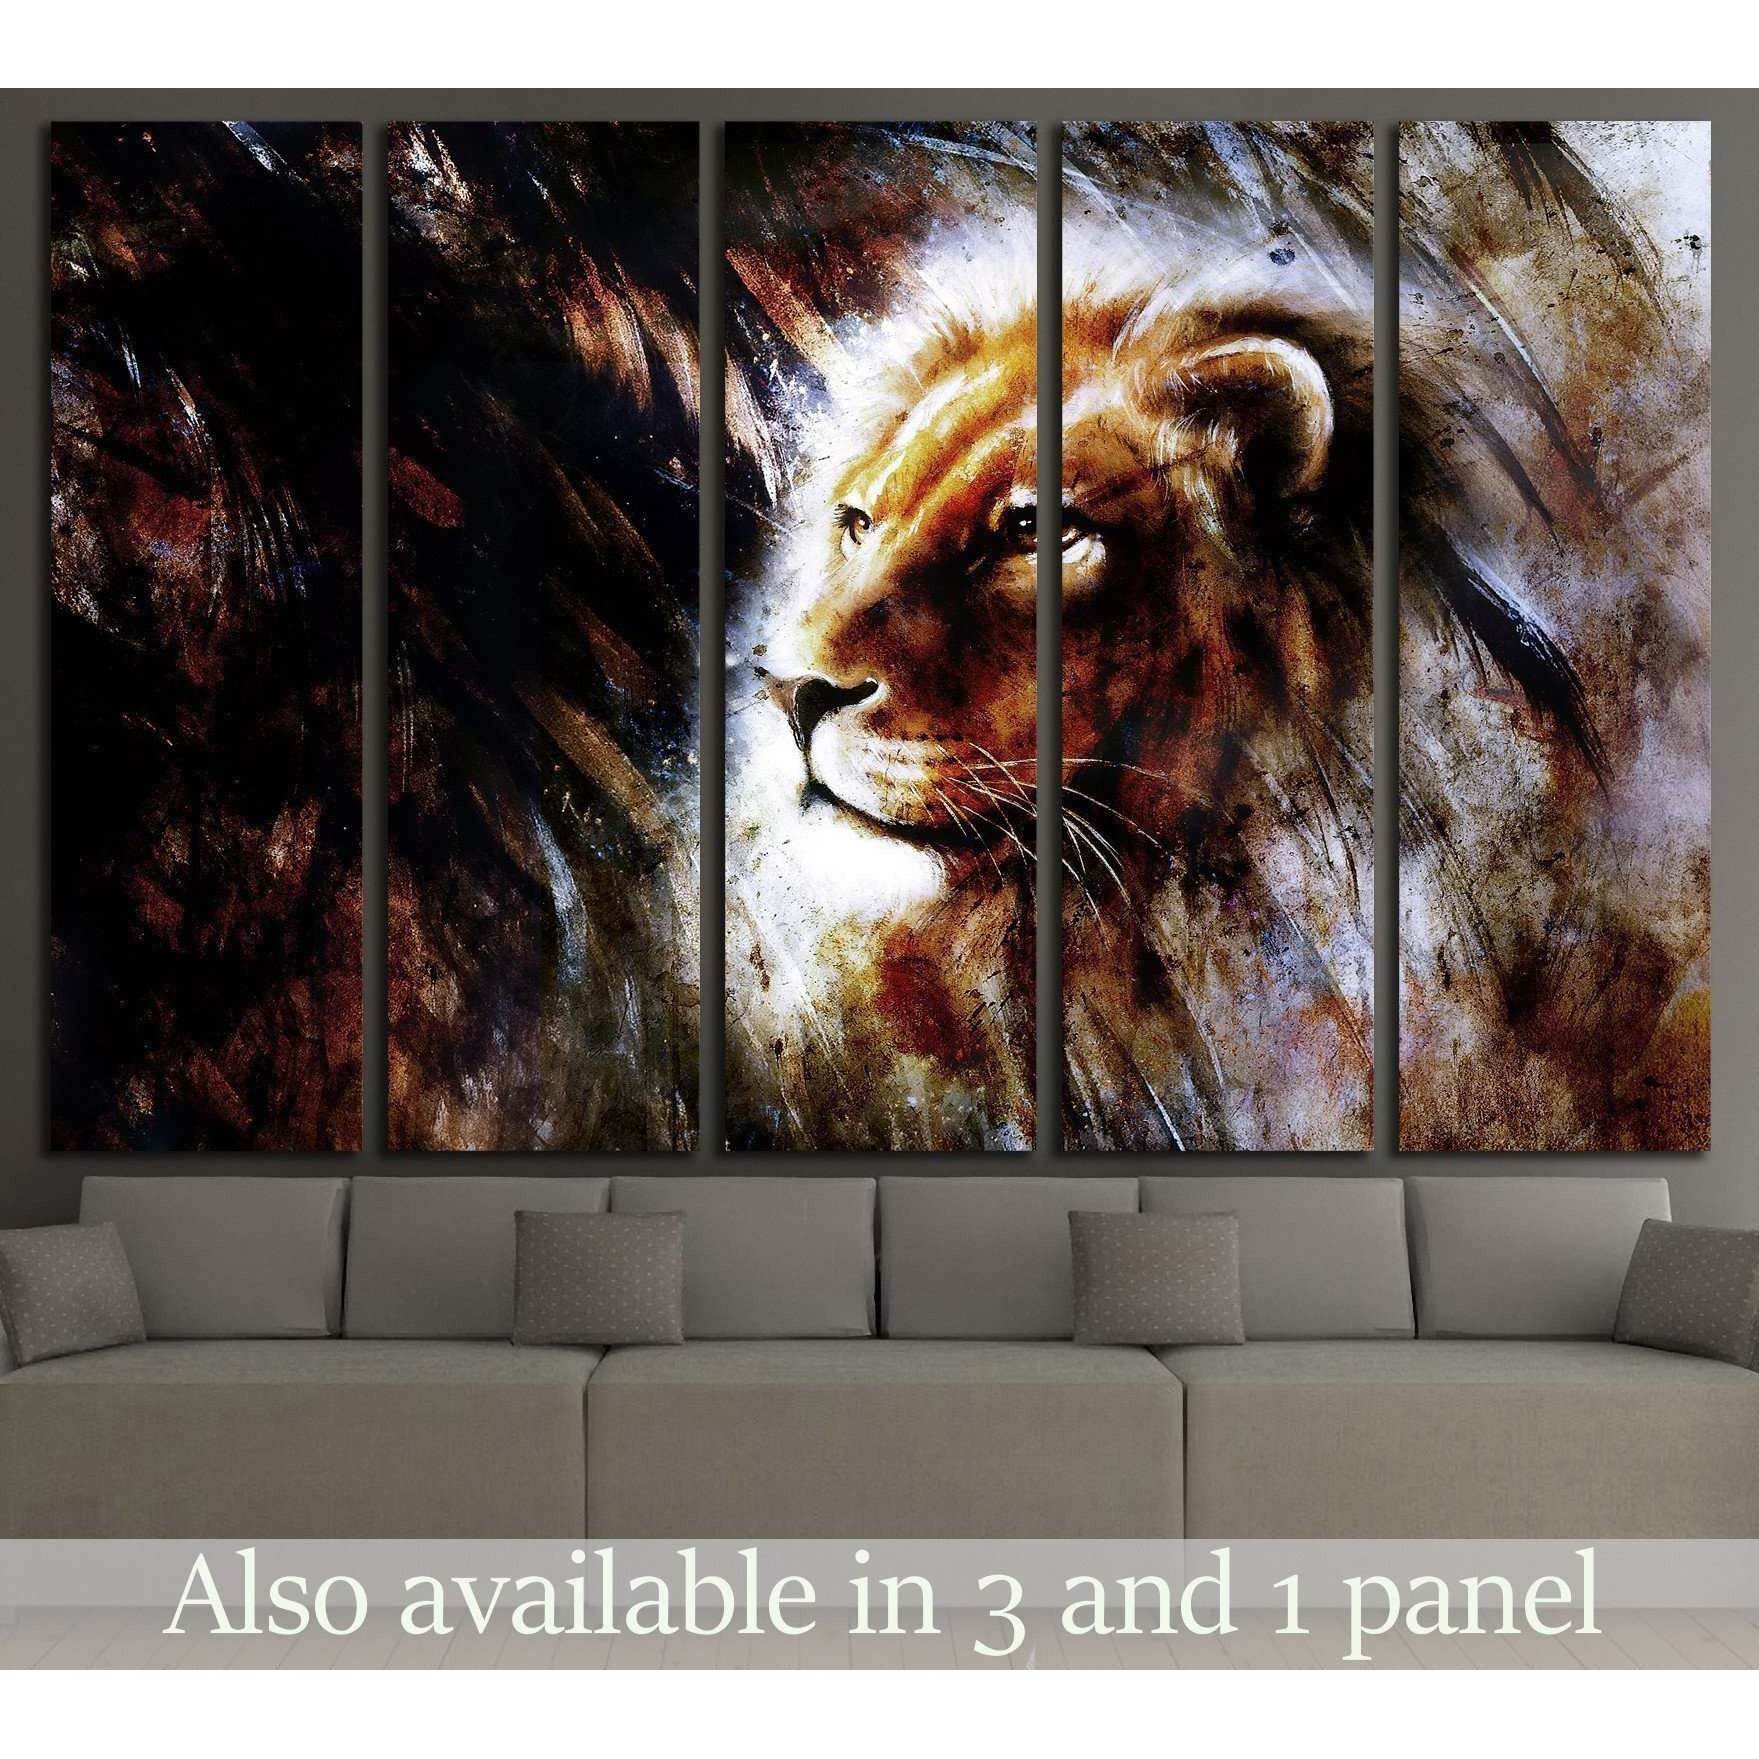 Lion Stare Head shot №1852 Ready to Hang Canvas Print